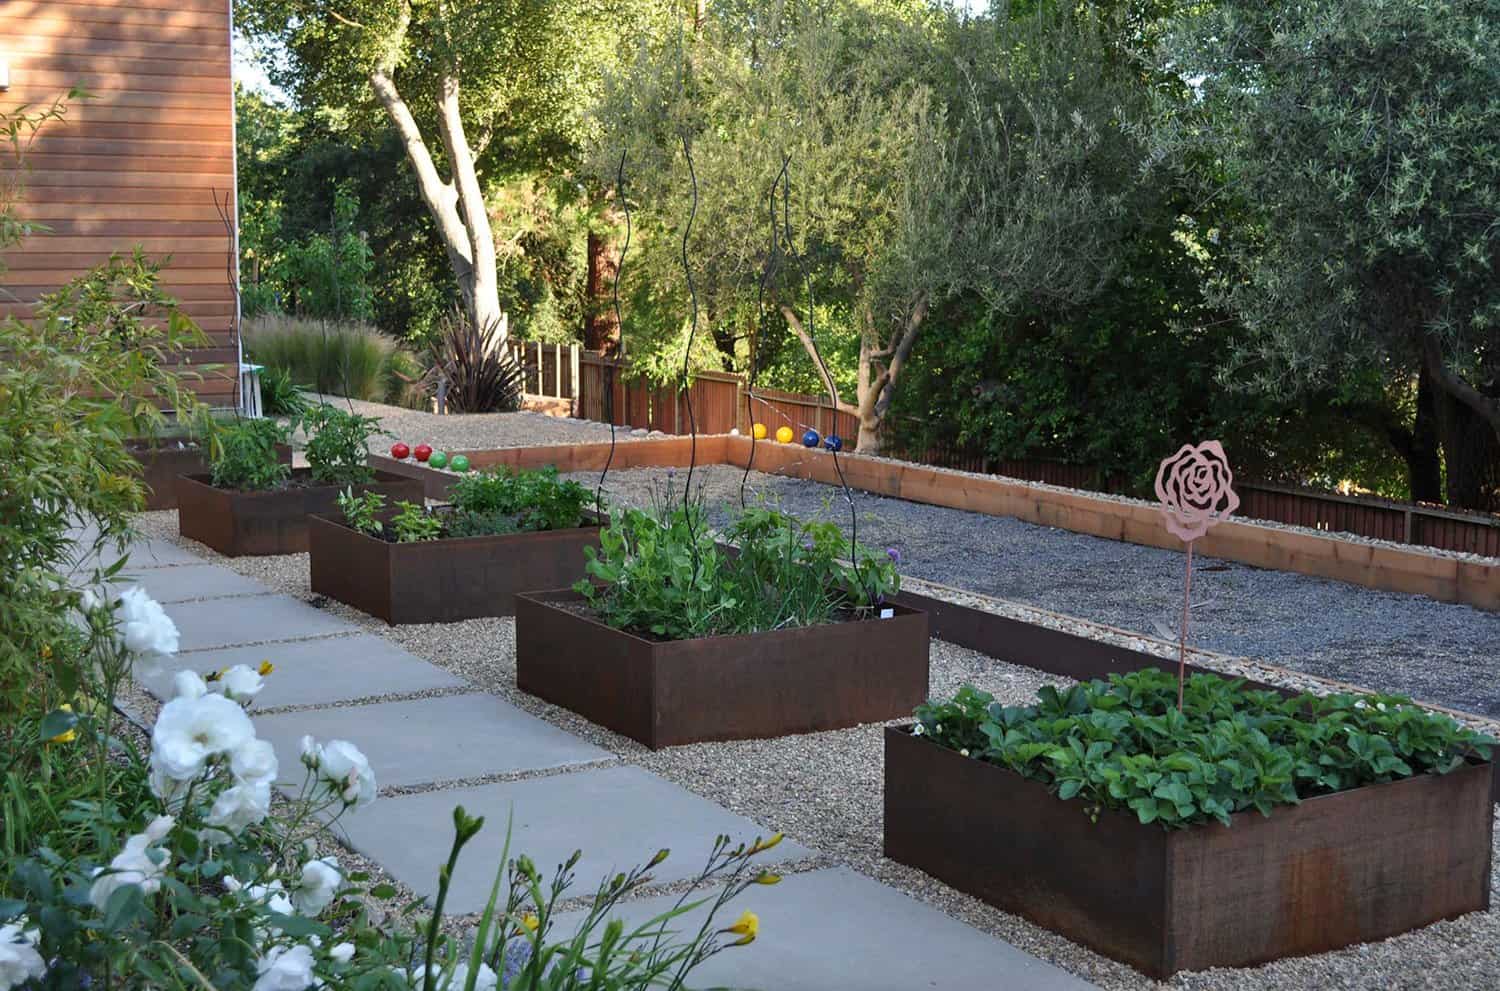 bocce-ball-court-and-corten-steel-raised-vegetable-beds